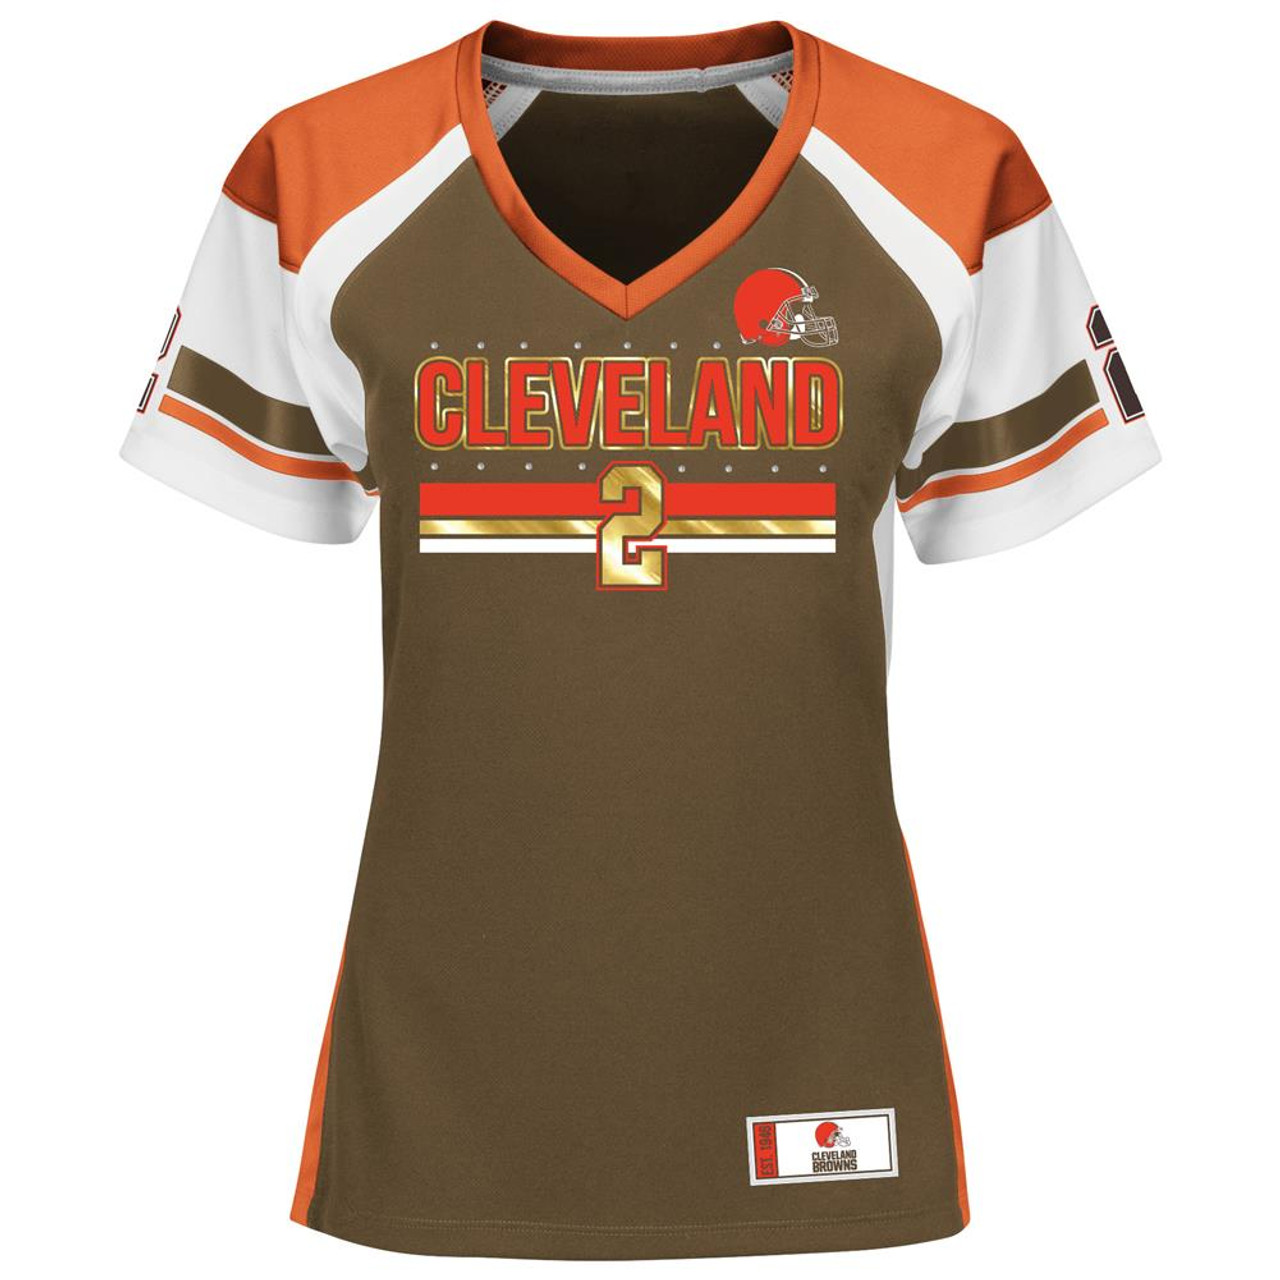 browns jersey